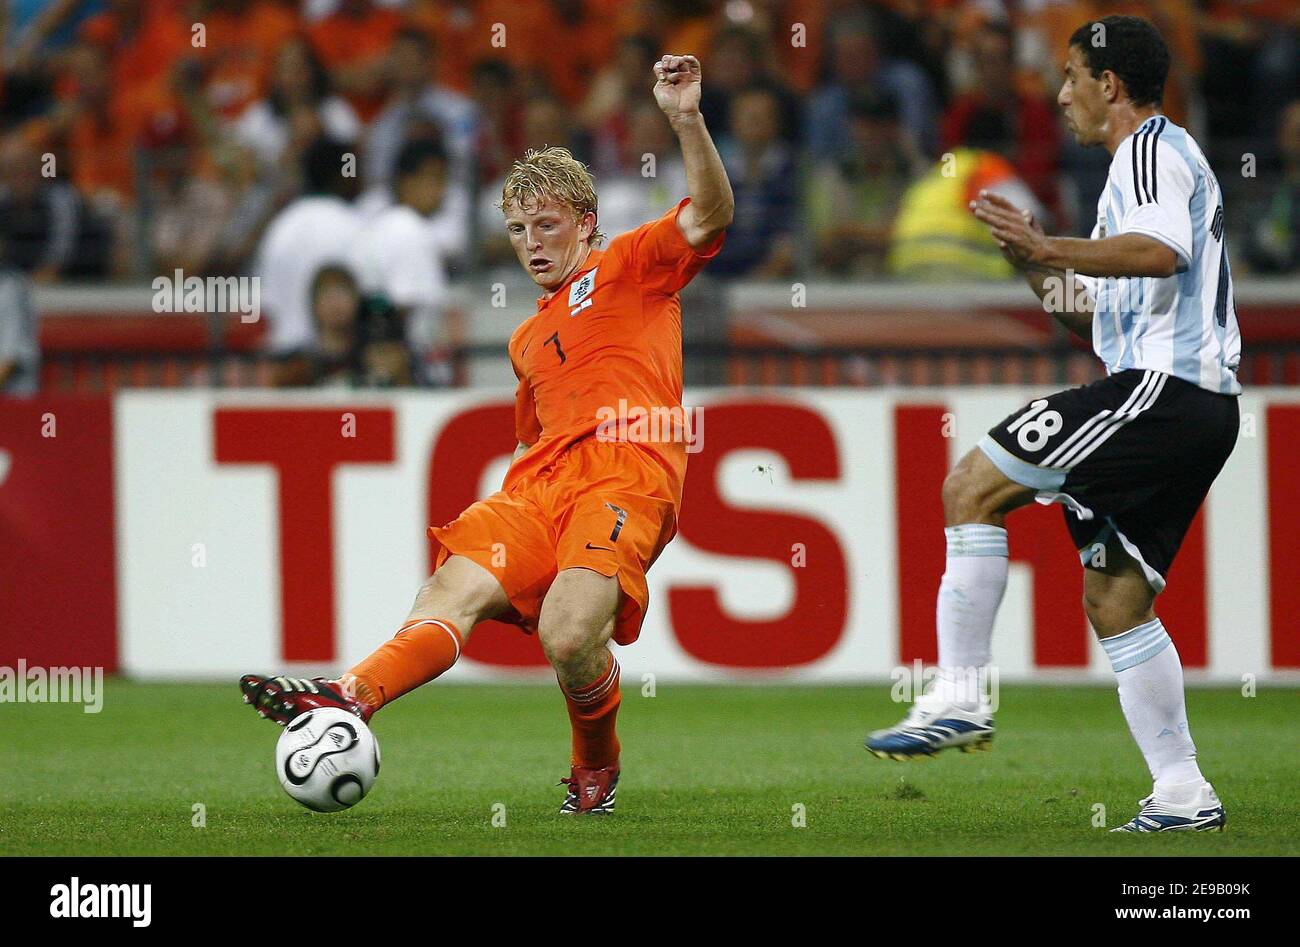 Netherland's Dirk Kuijt and Argentina's Maxi Rodriguez during the World Cup 2006, Group C, Netherlands vs Argentina at the Commerzbank-Arena Stadium in Frankfurt, Germany on June 21, 2006. The match ended in 0-0 draw. Photo by Chritian Liewig/Cameleon/ABACAPRESS.COM Stock Photo